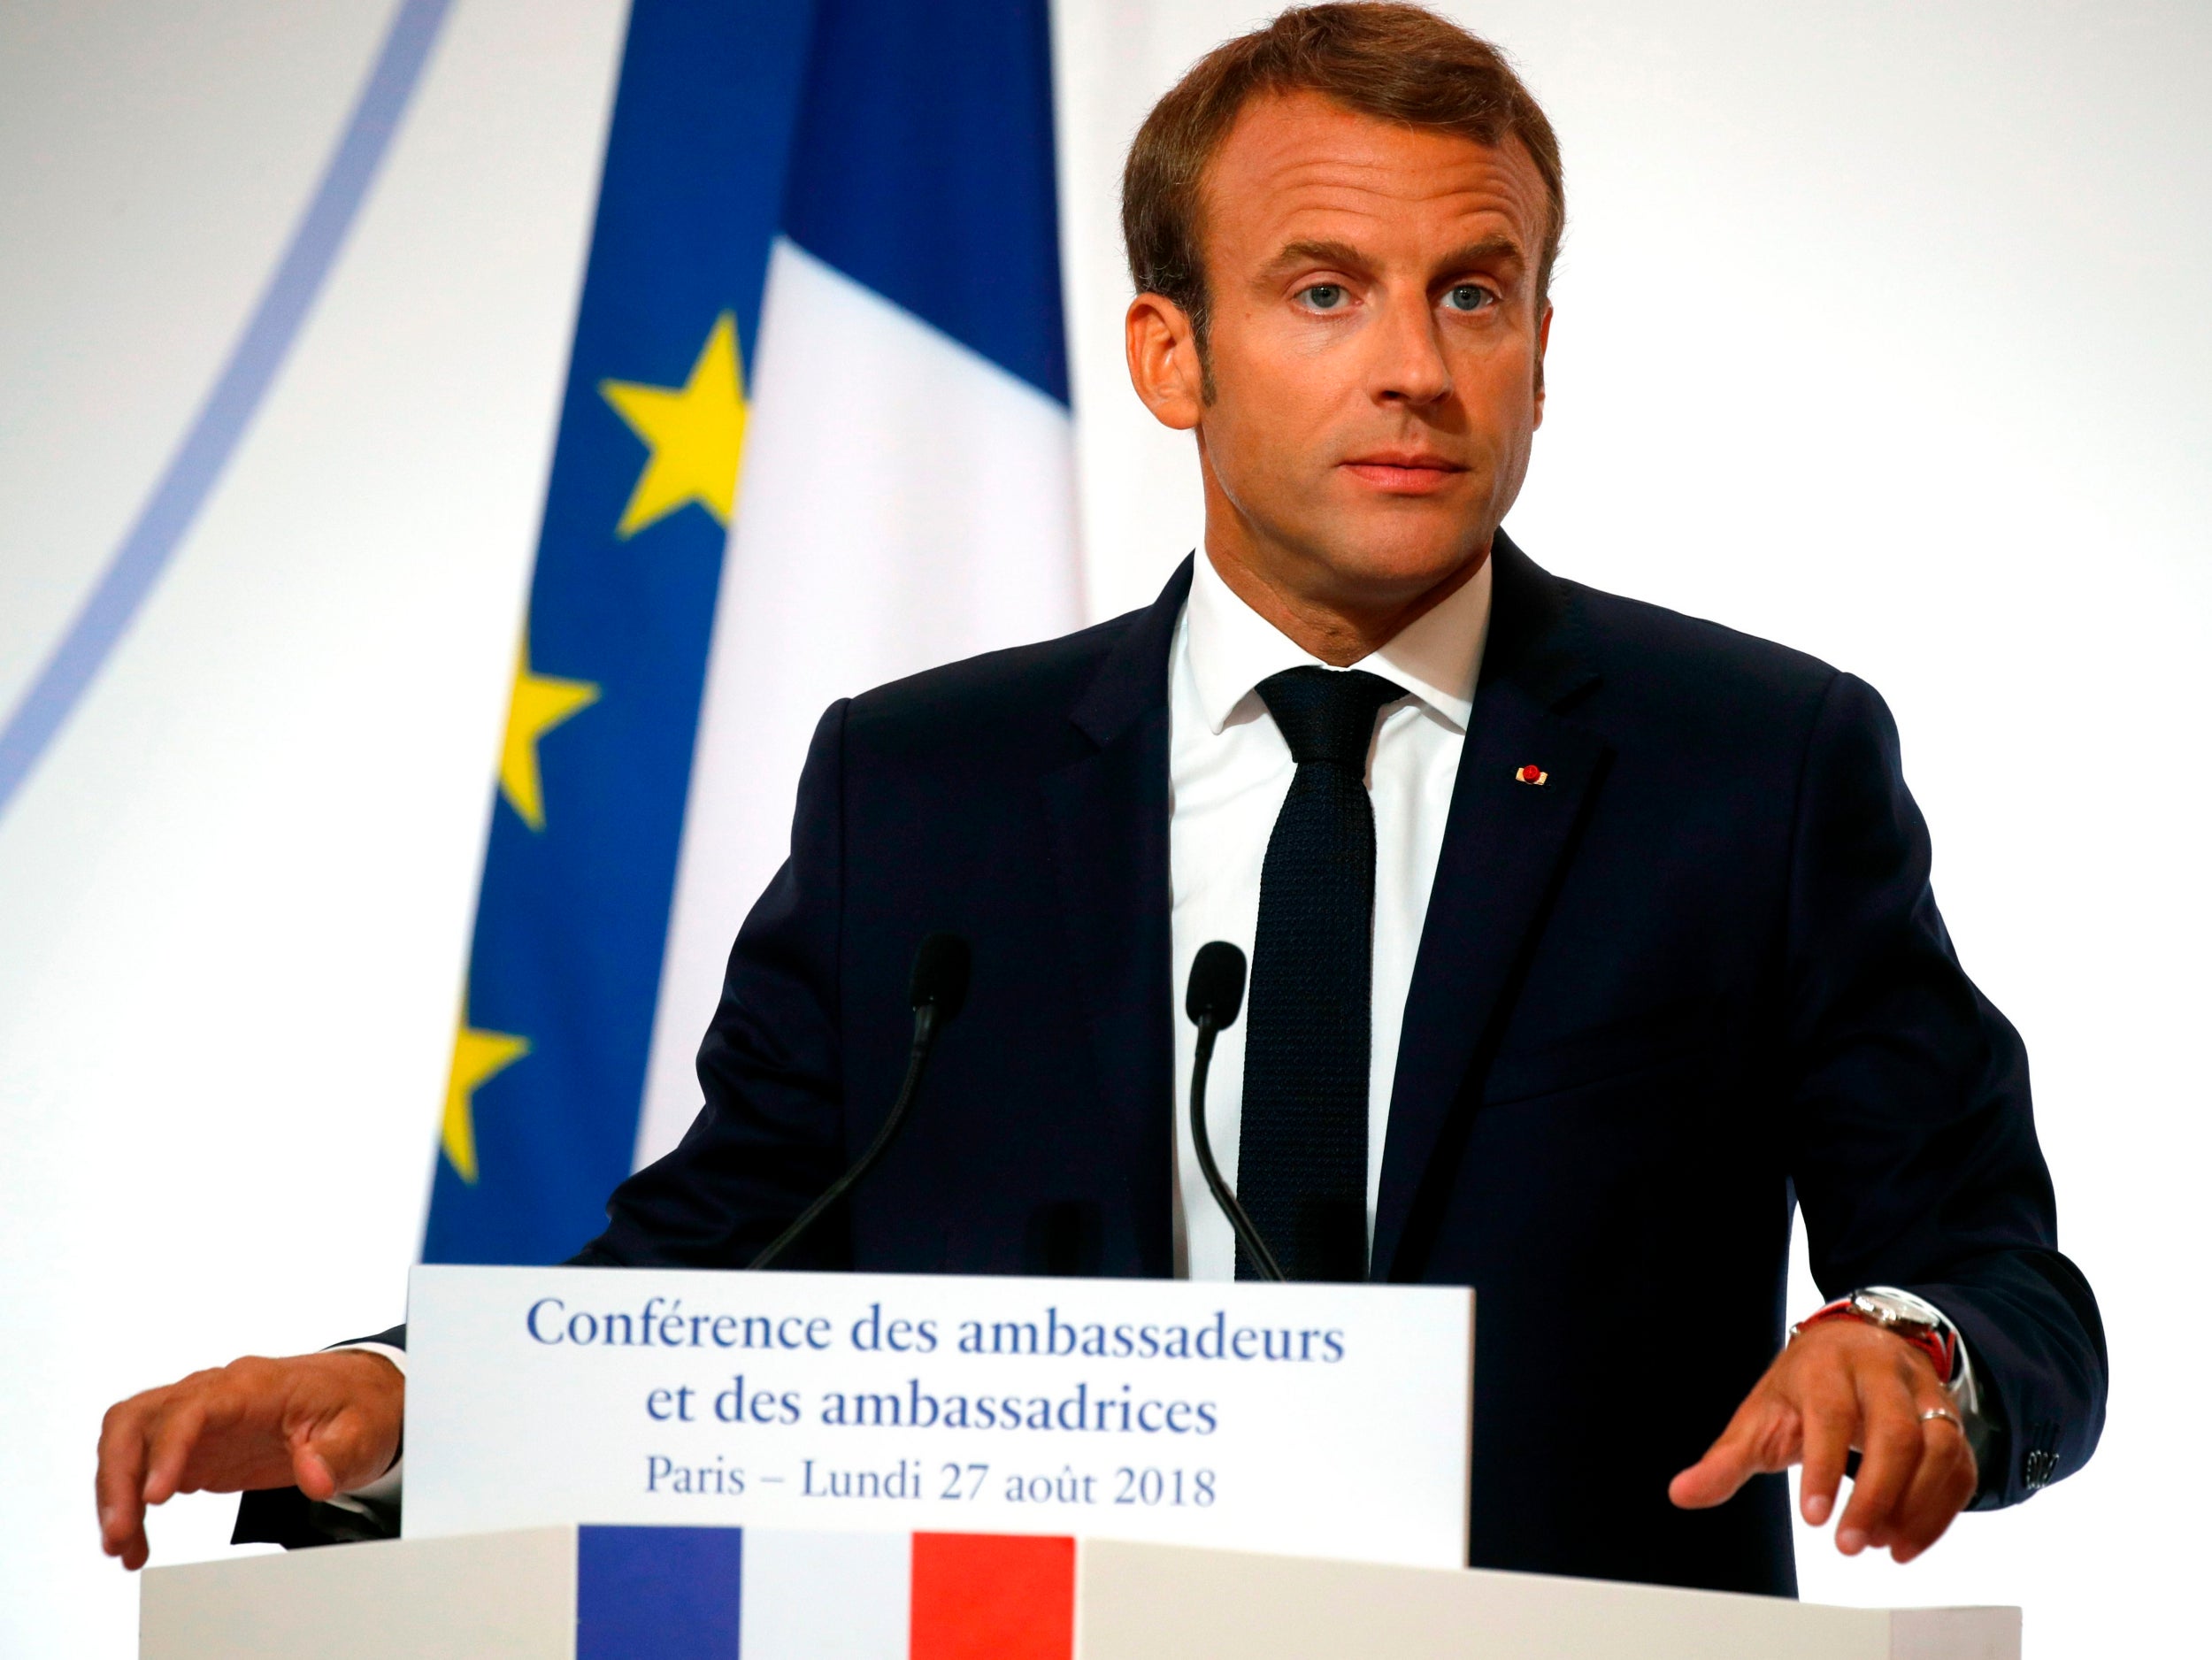 Structurally, Macron envisages a more stable new framework for European relations